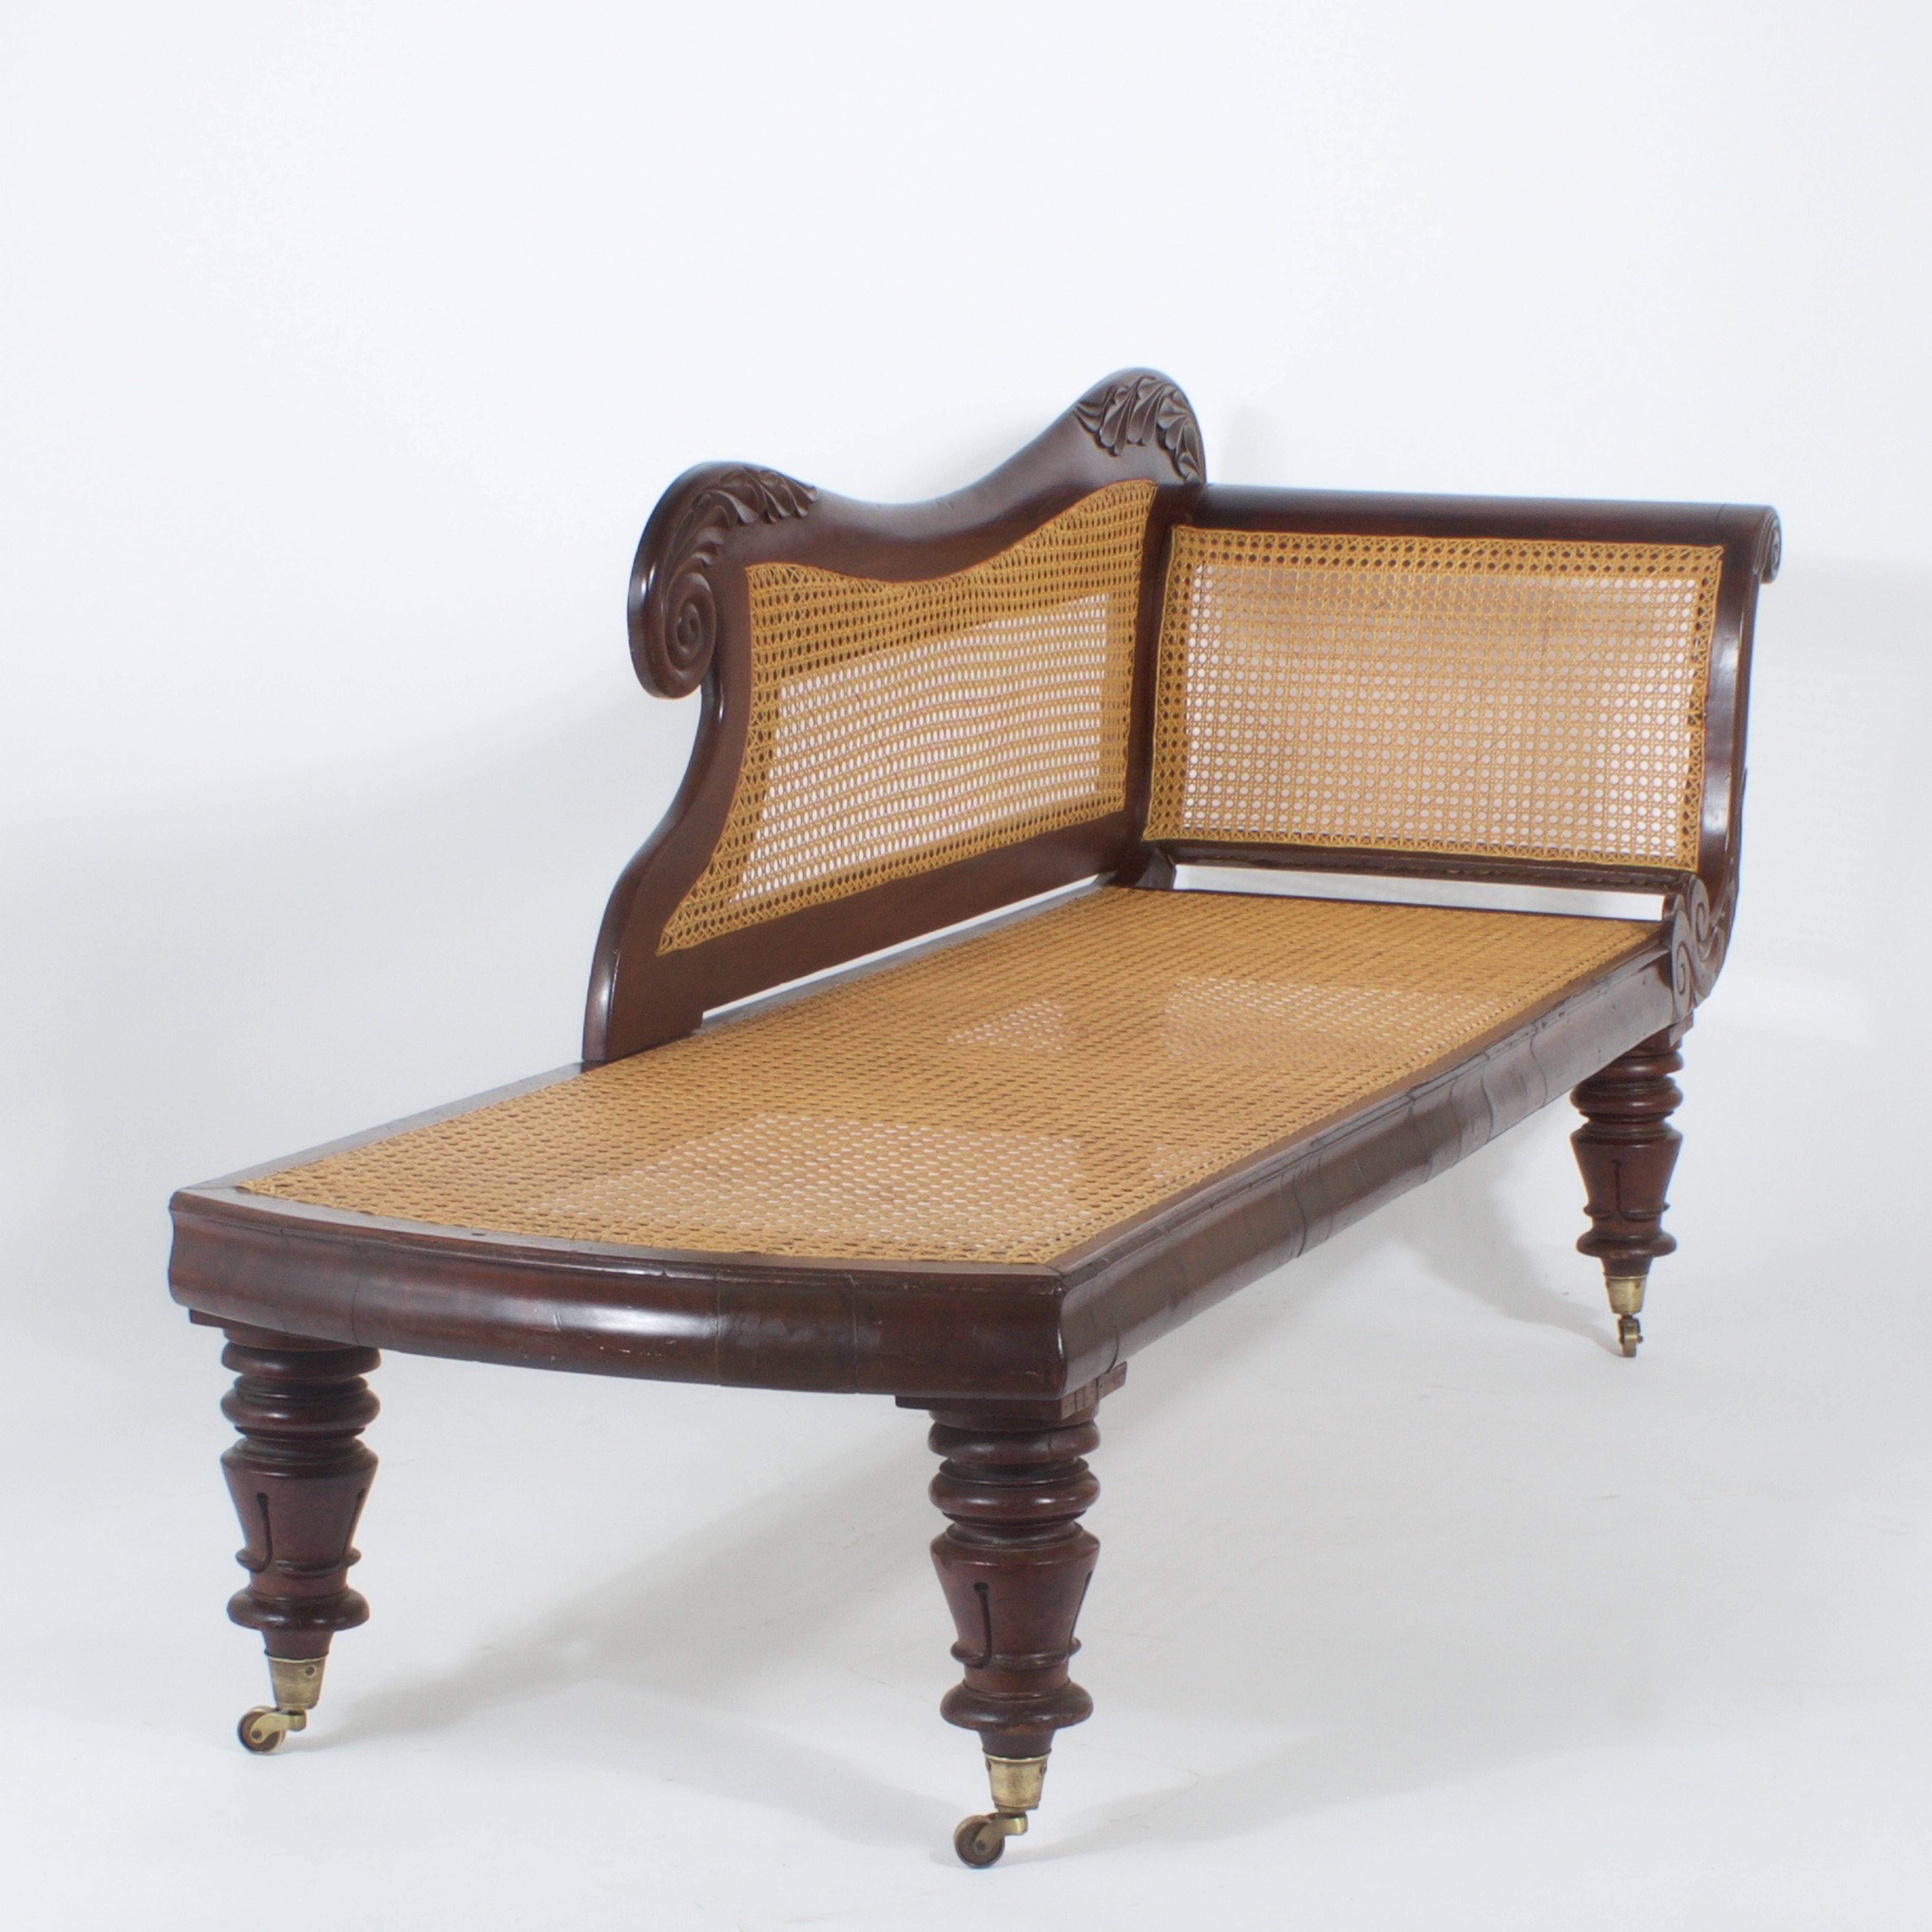 Bajan West Indies Caned Chaise Lounge or Longue, Pair a Possibility